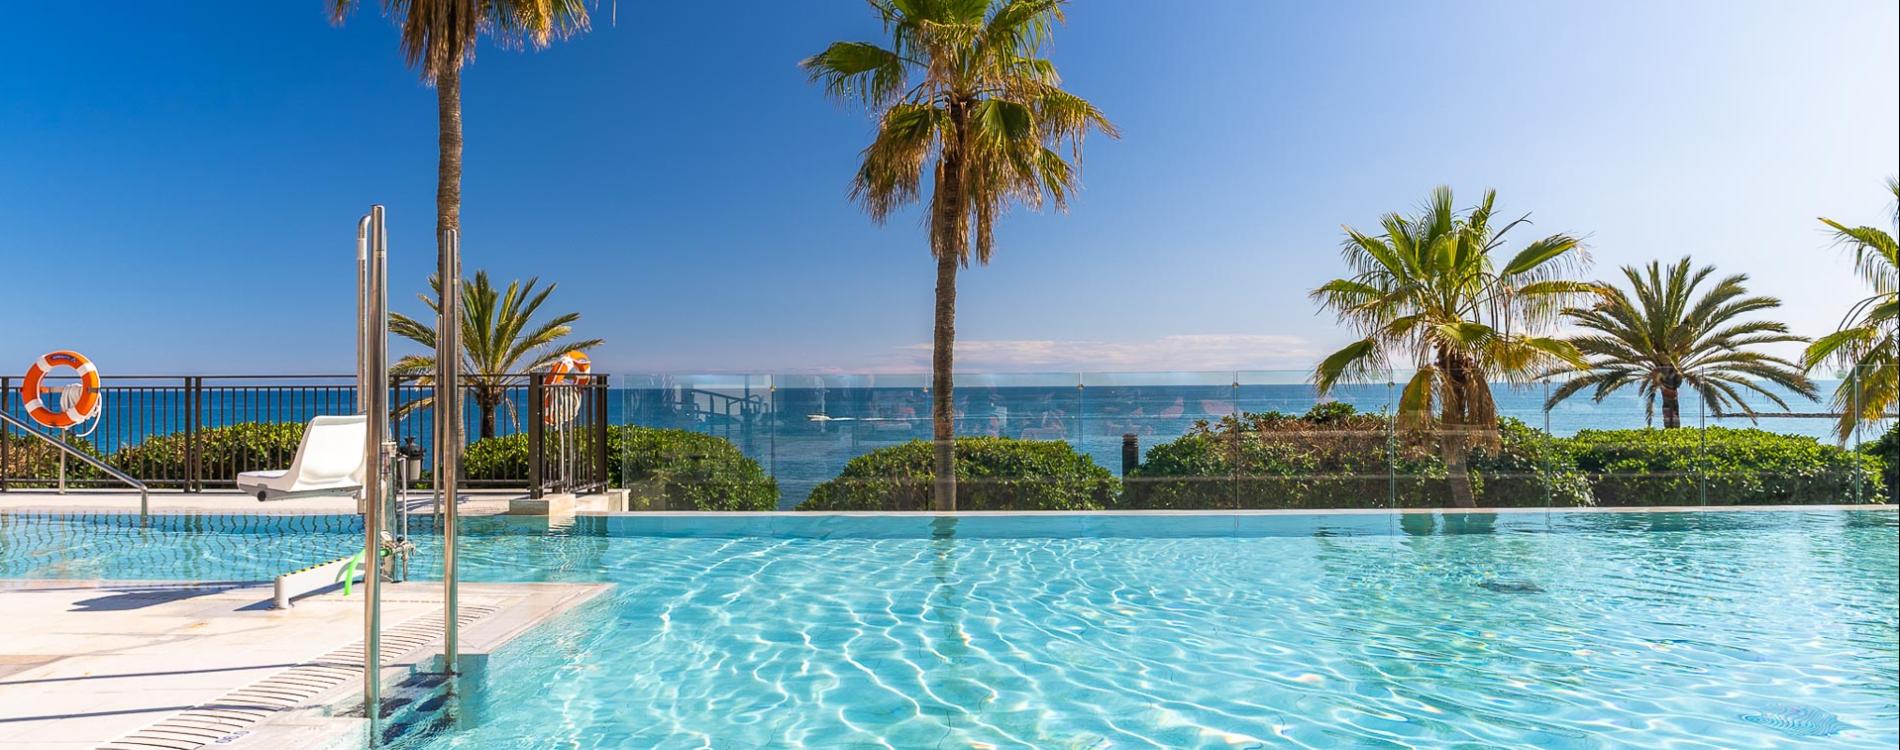 Top 5 Hotels in Marbella, Best Hotel Recommendations 